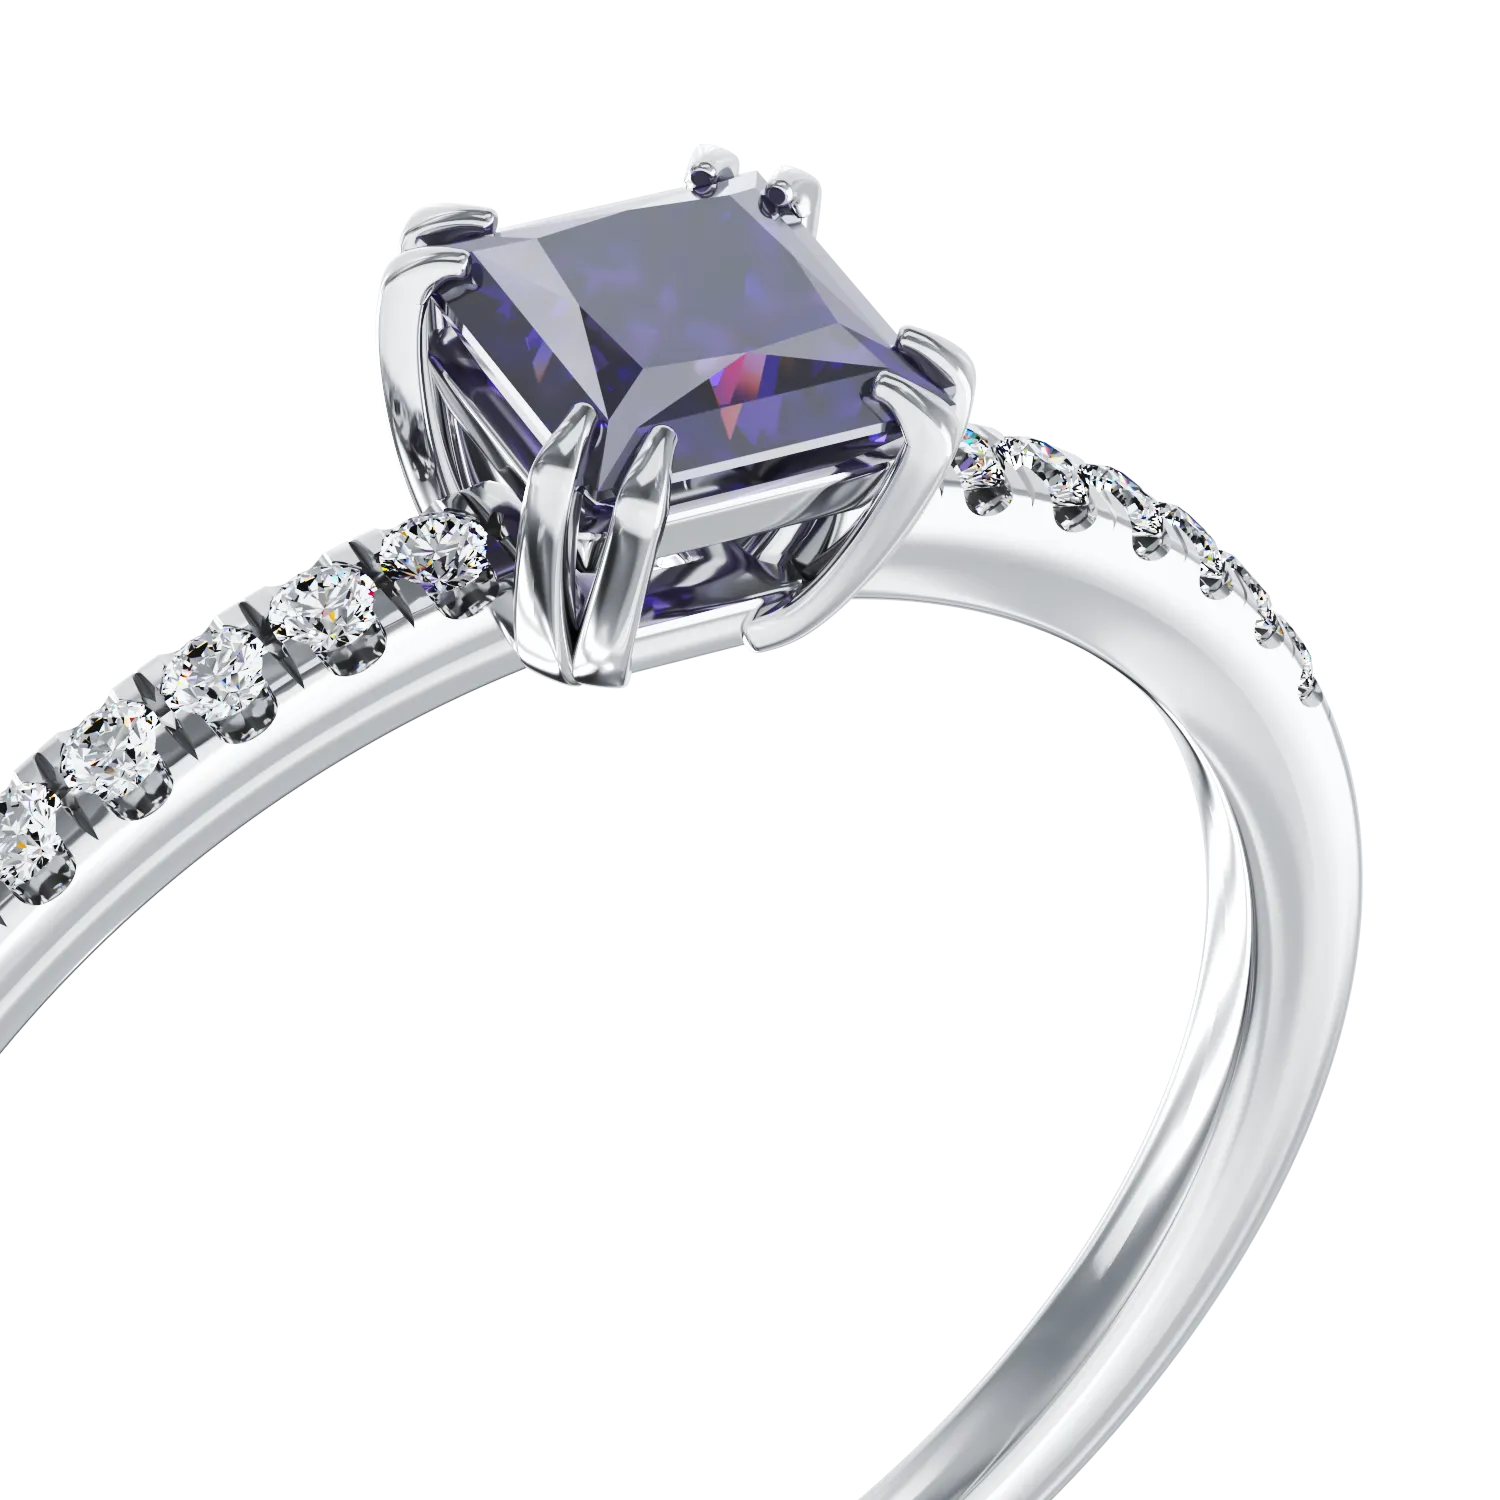 18K white gold engagement ring with tanzanite of 0.4ct and diamonds of 0.05ct